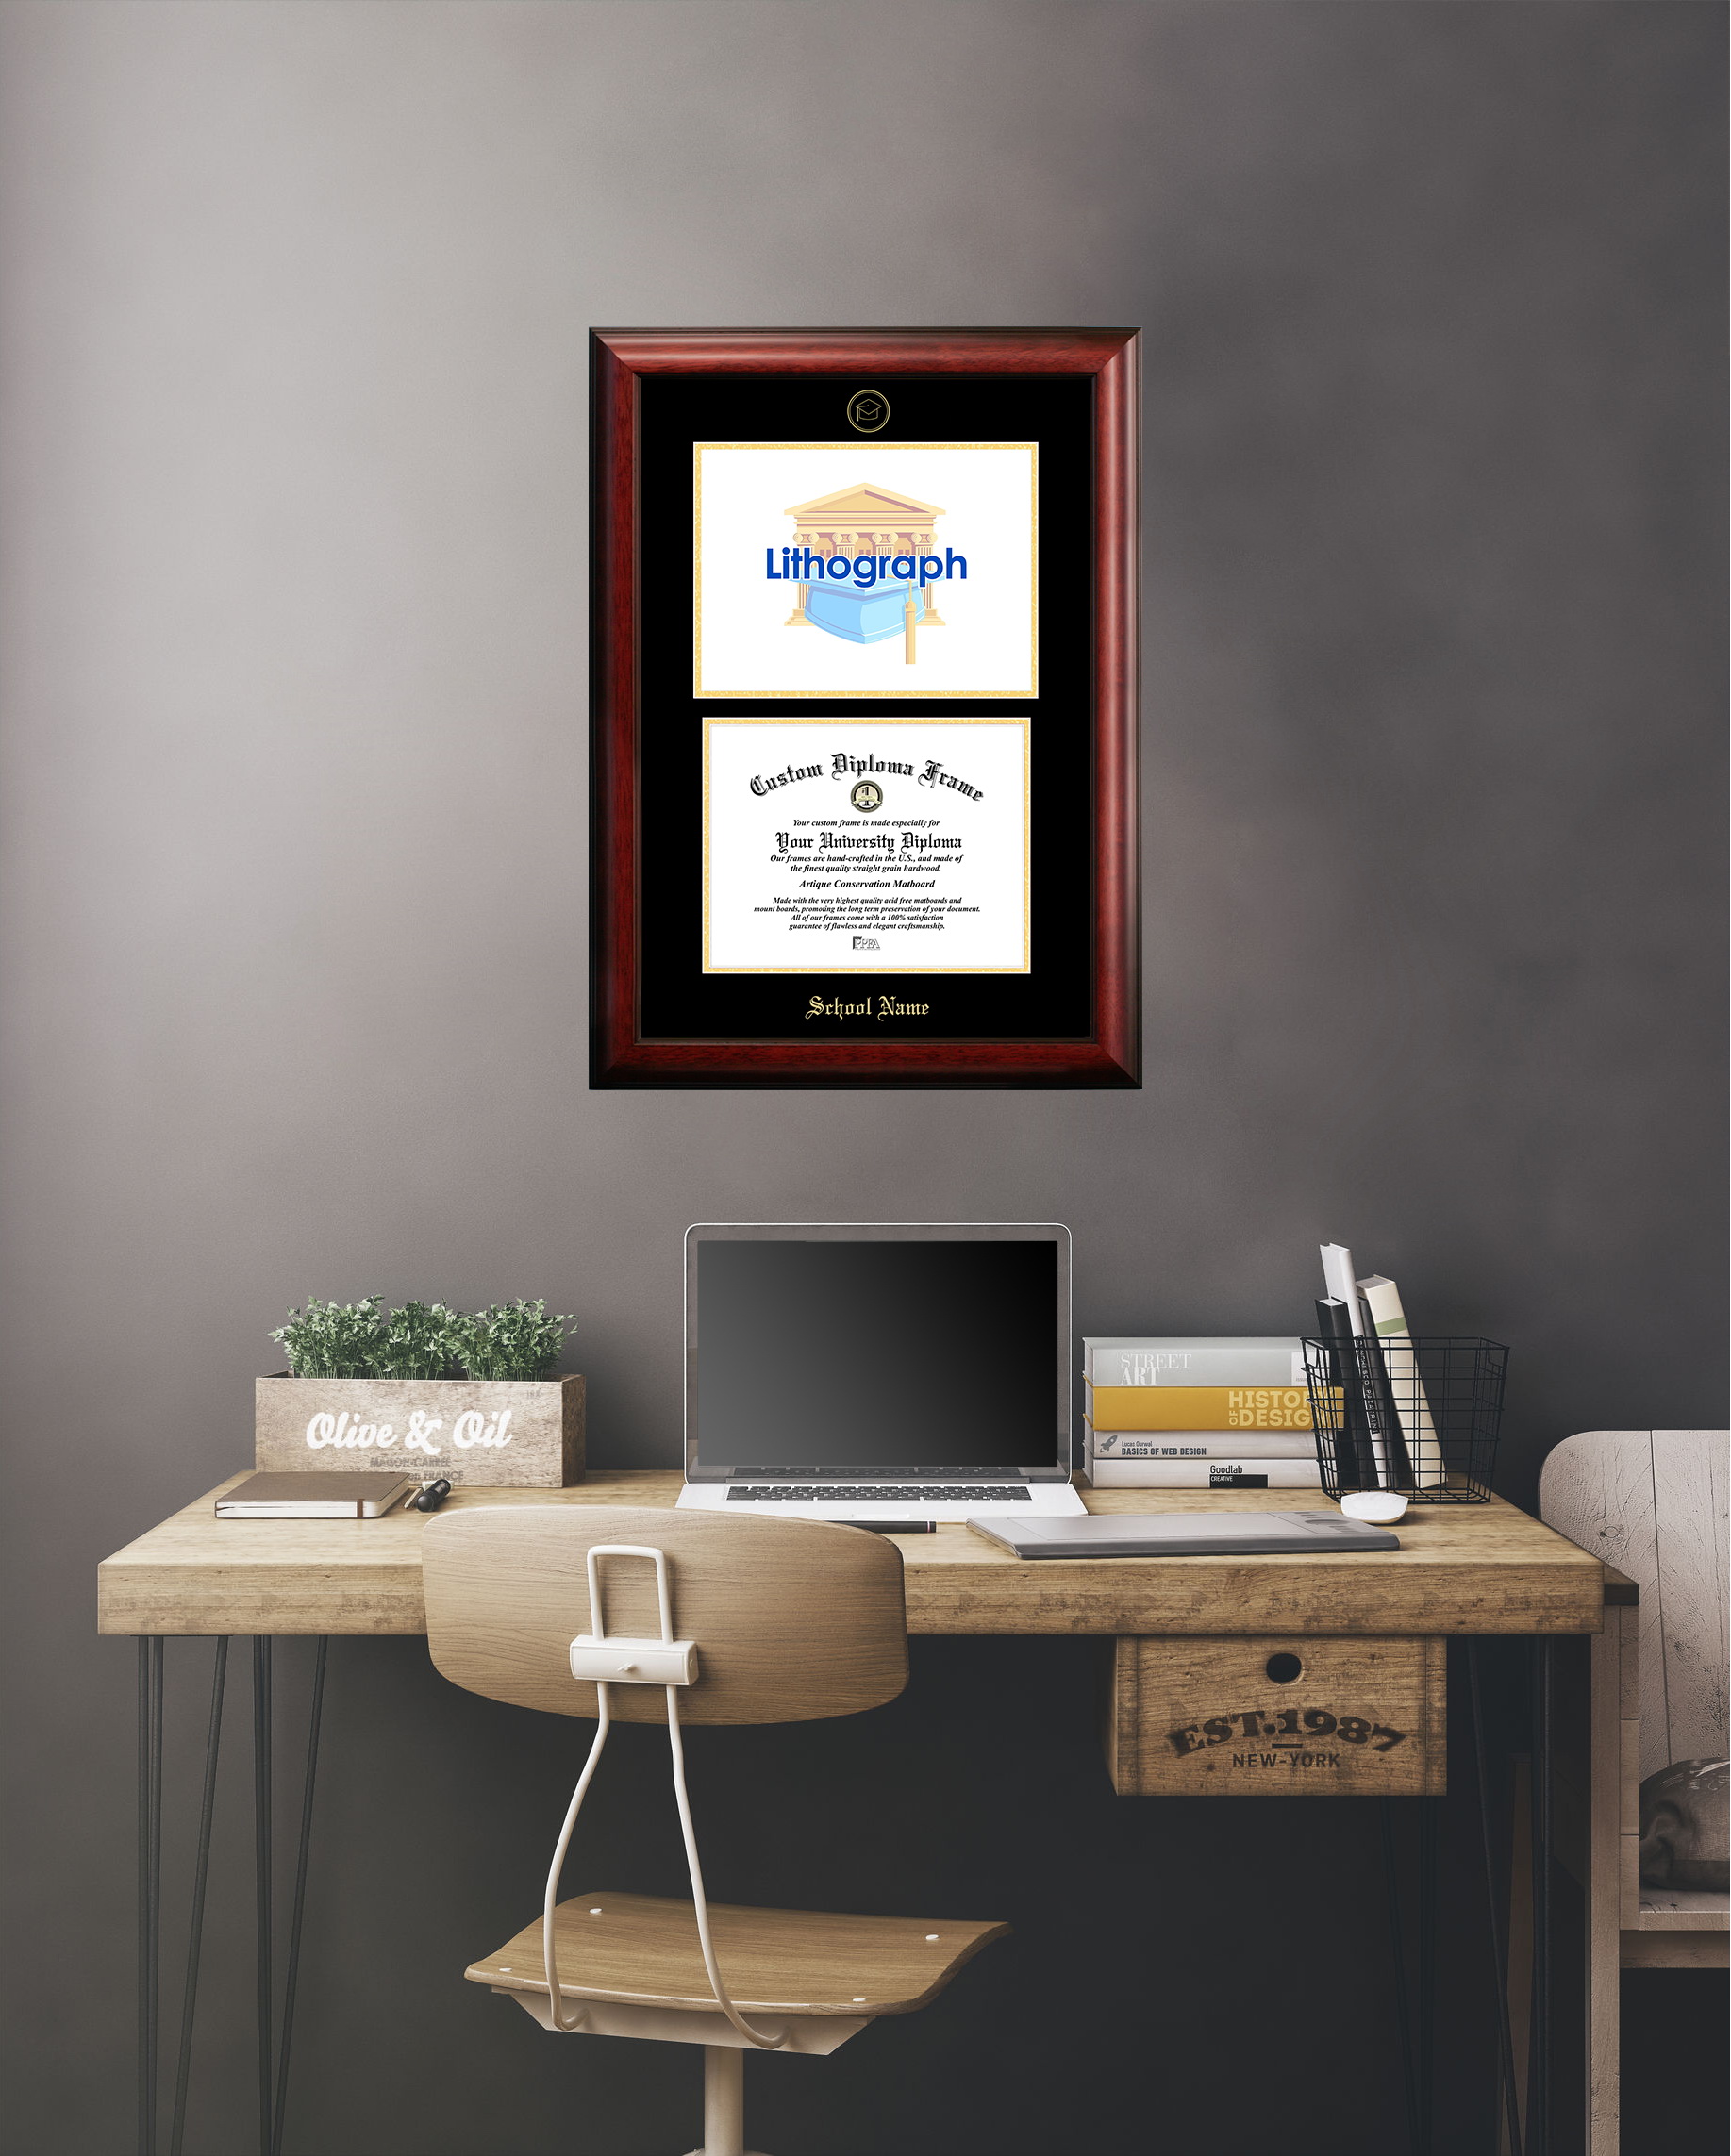 Campus Images MI987LSED-1185 Michigan State University, Spartan, 11w x 8.5h Silver Embossed Diploma Frame with Campus Images Lithograph